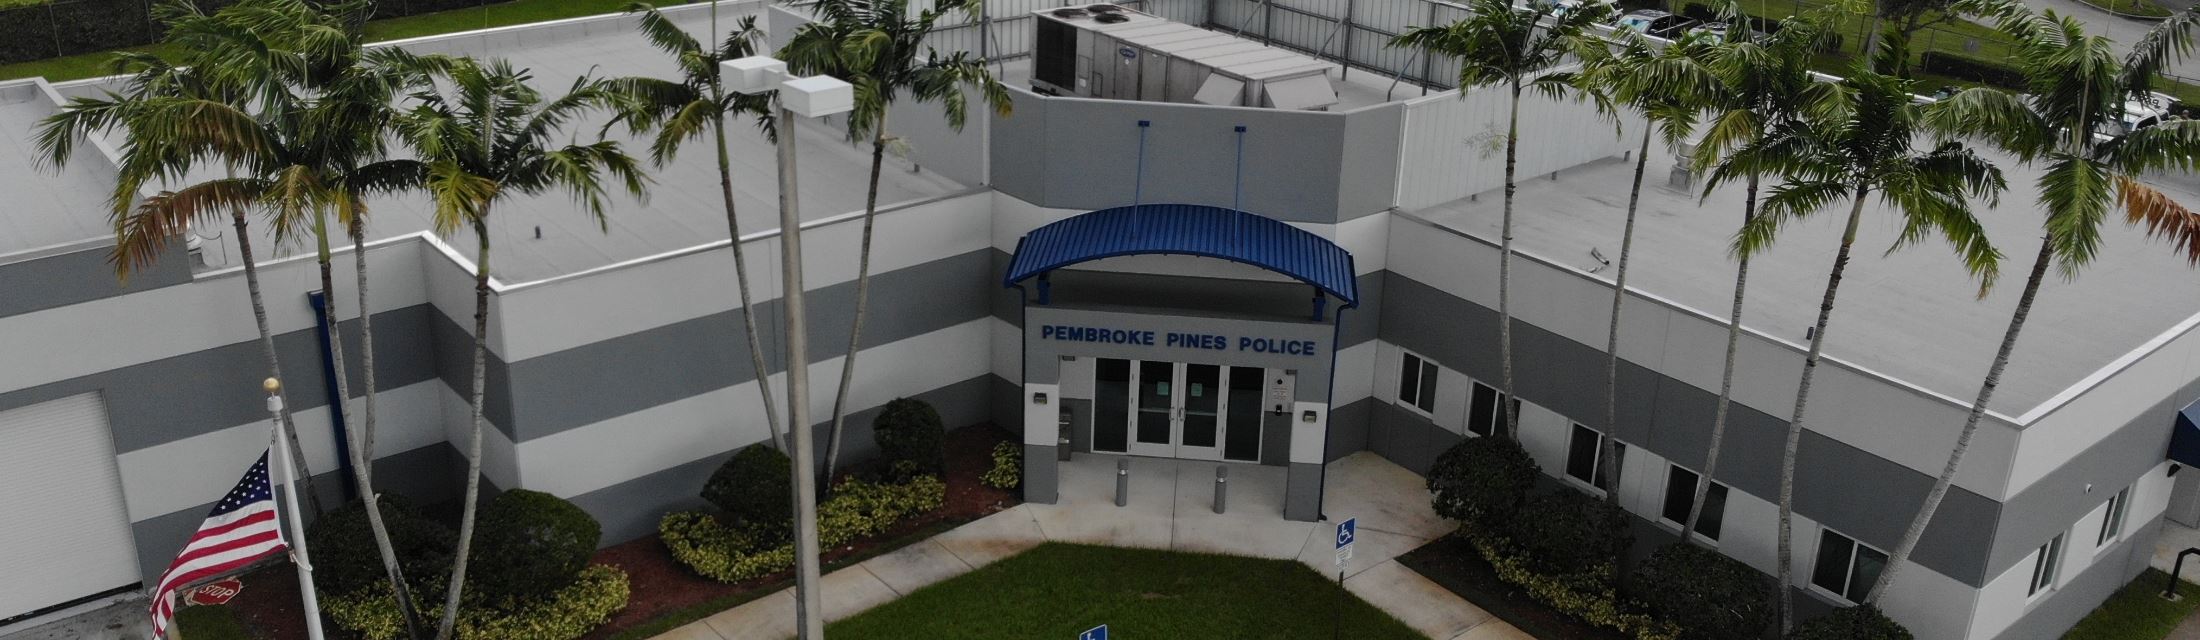 Image of City of Pembroke Pines Police Department